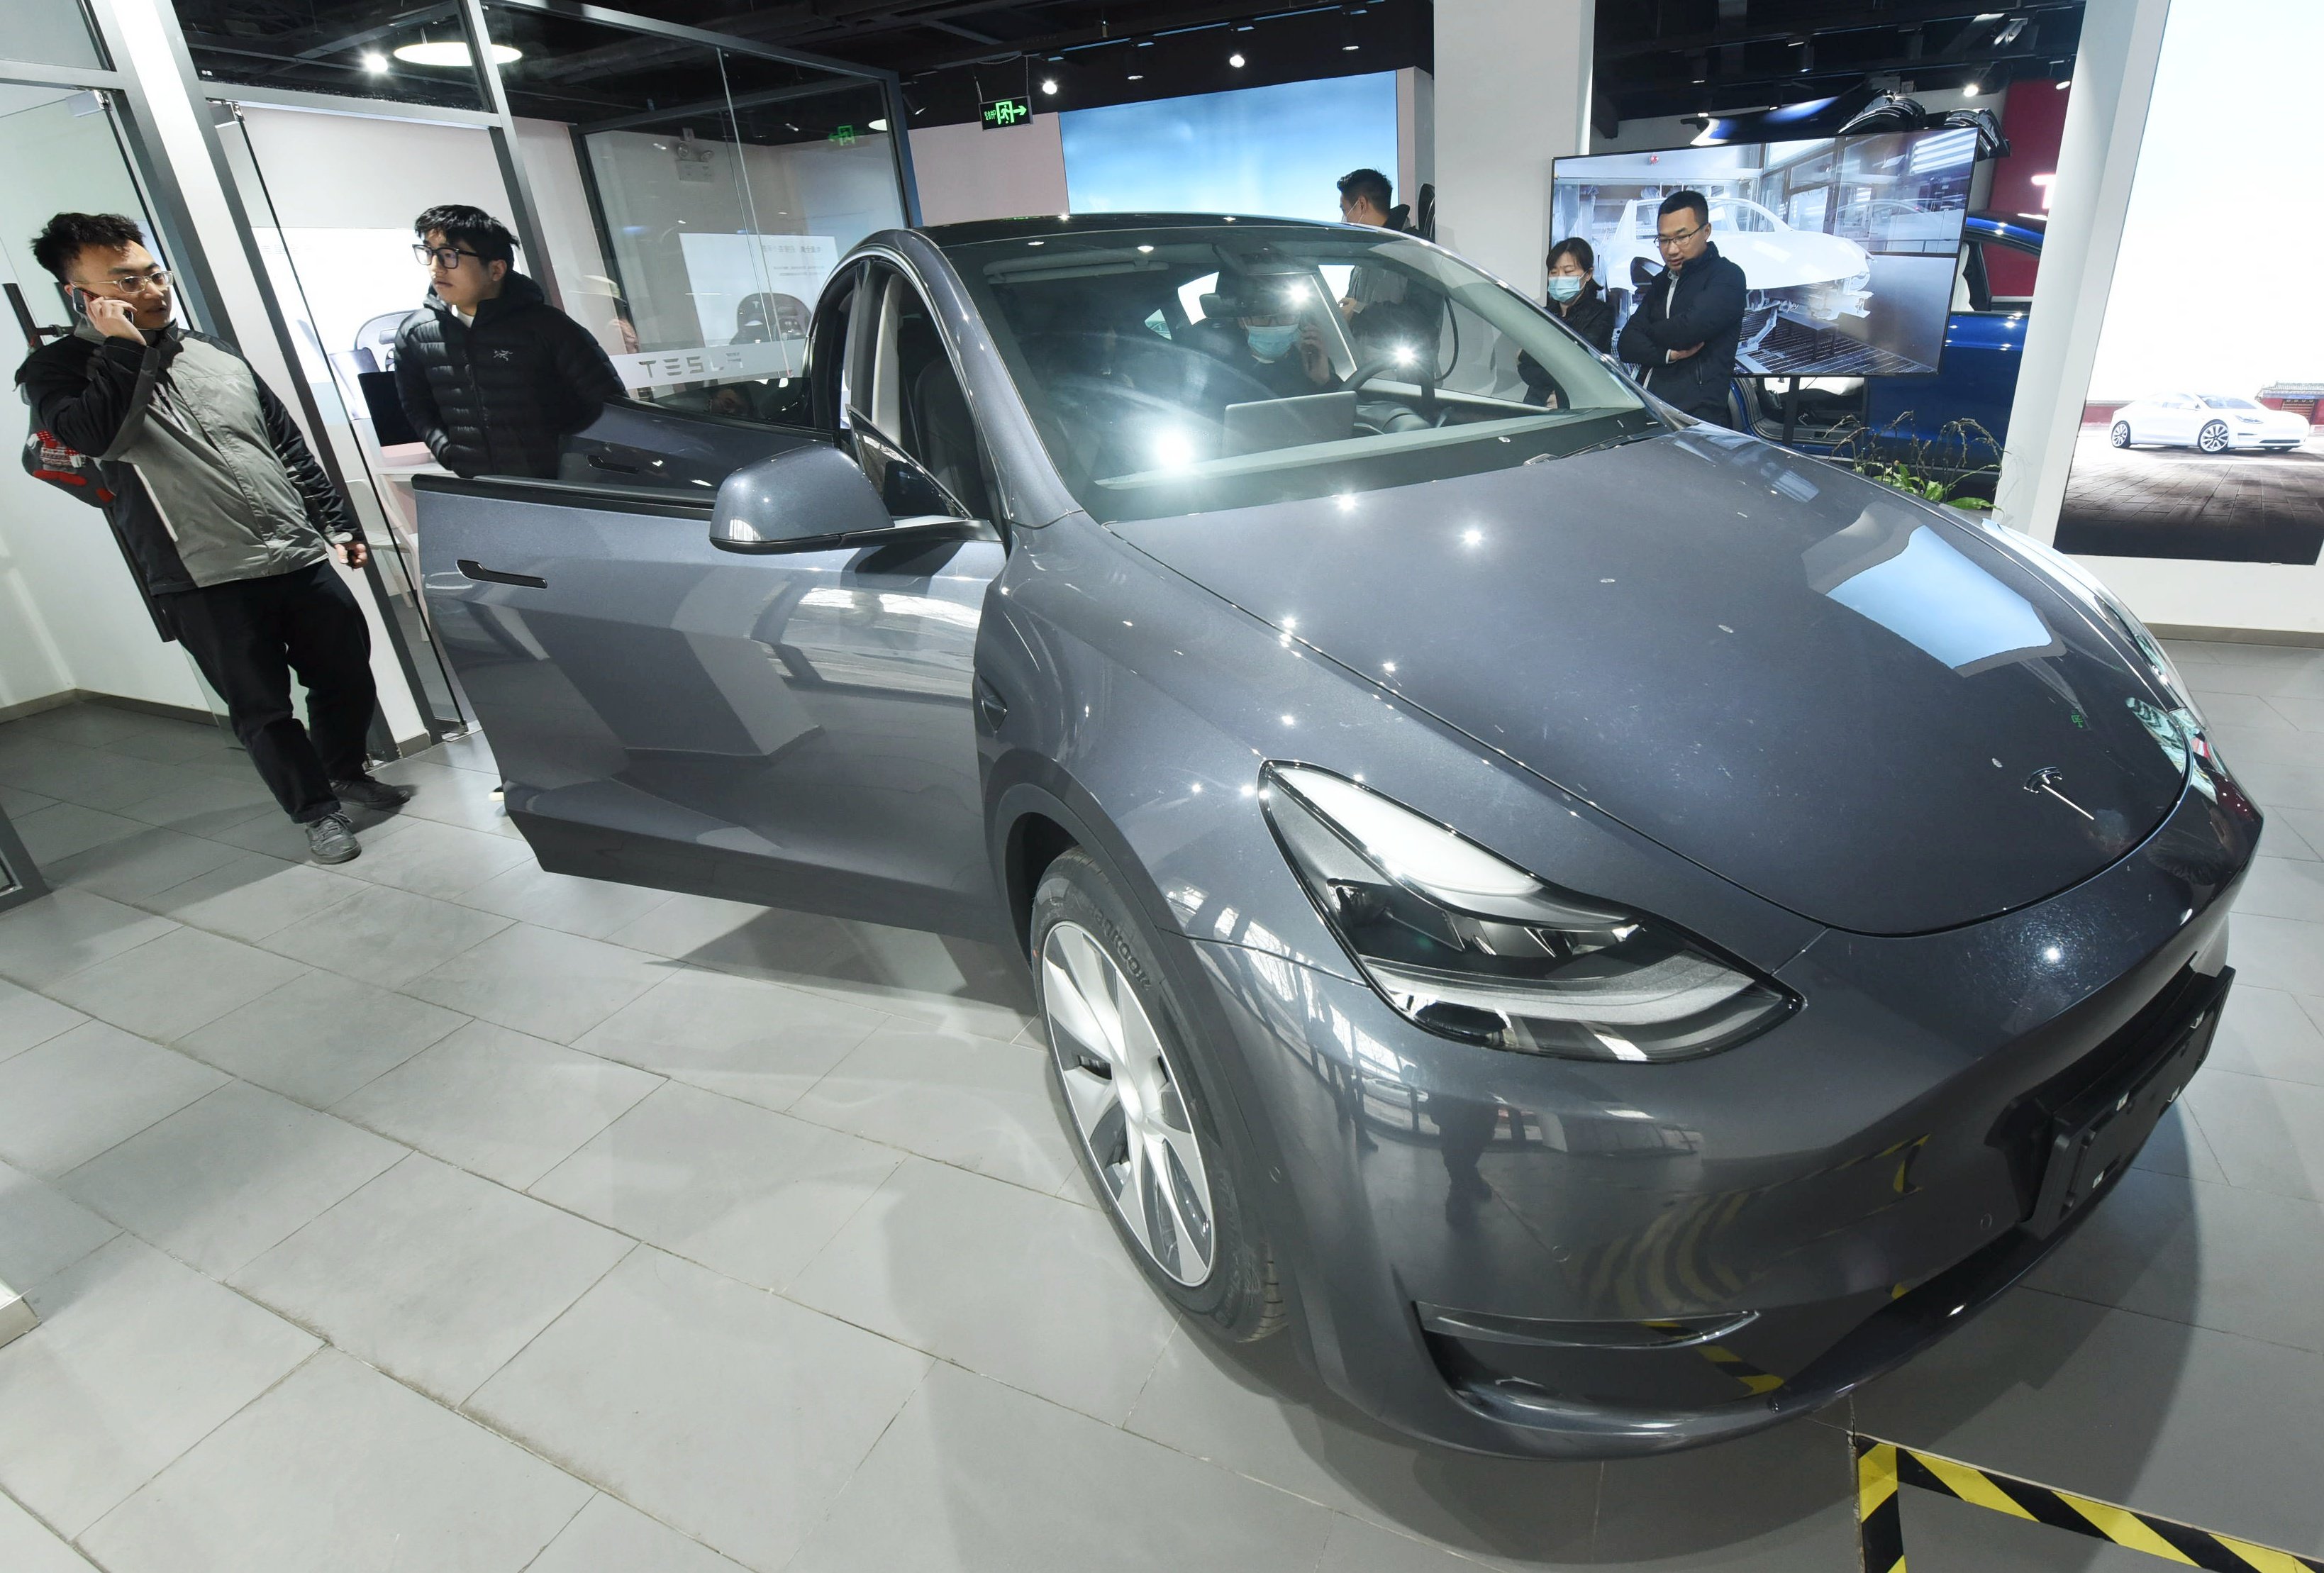 Customers look at the first Model Y electric cars arriving at a Tesla showroom in Hangzhou, east China’s Zhejiang province, on January 4, 2021. Photo: Costfoto/Barcroft Media via Getty Images